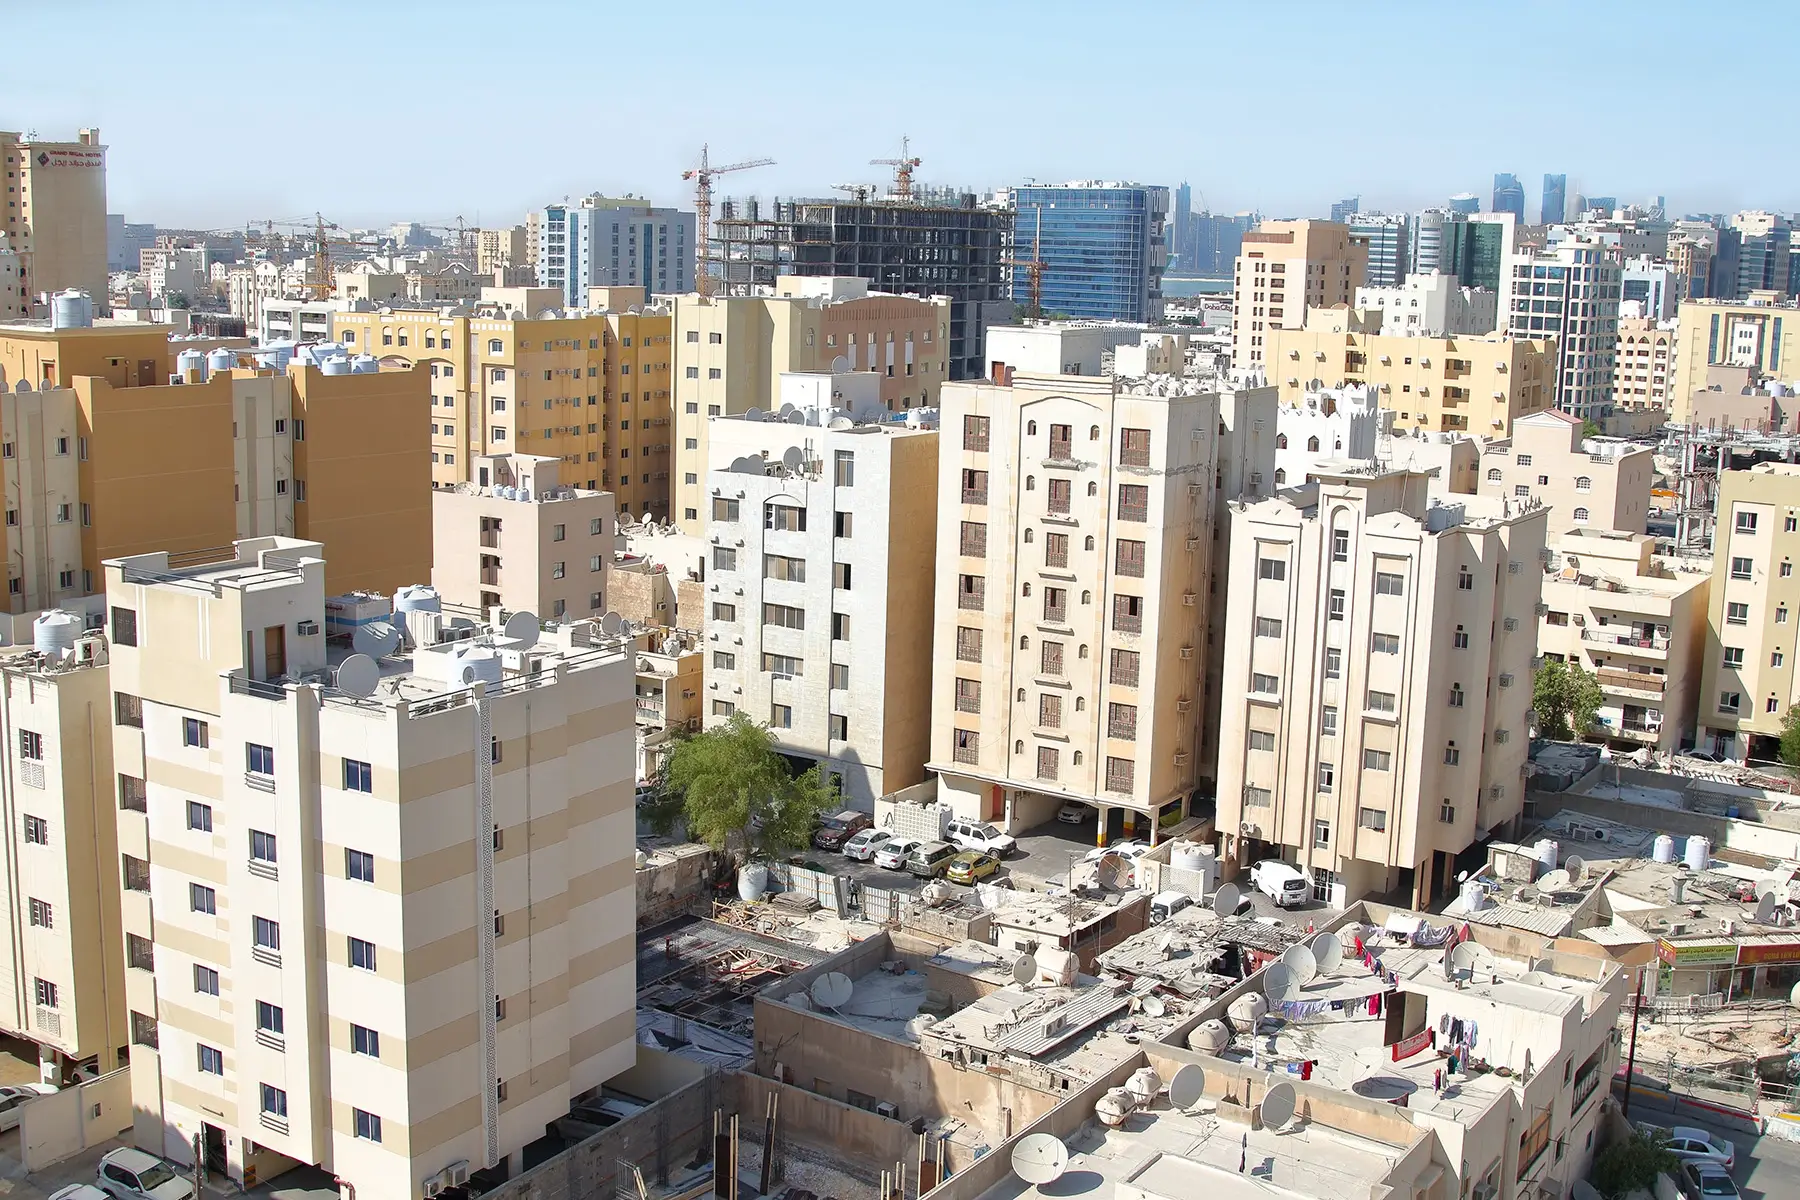 Typical residential buildings in Doha